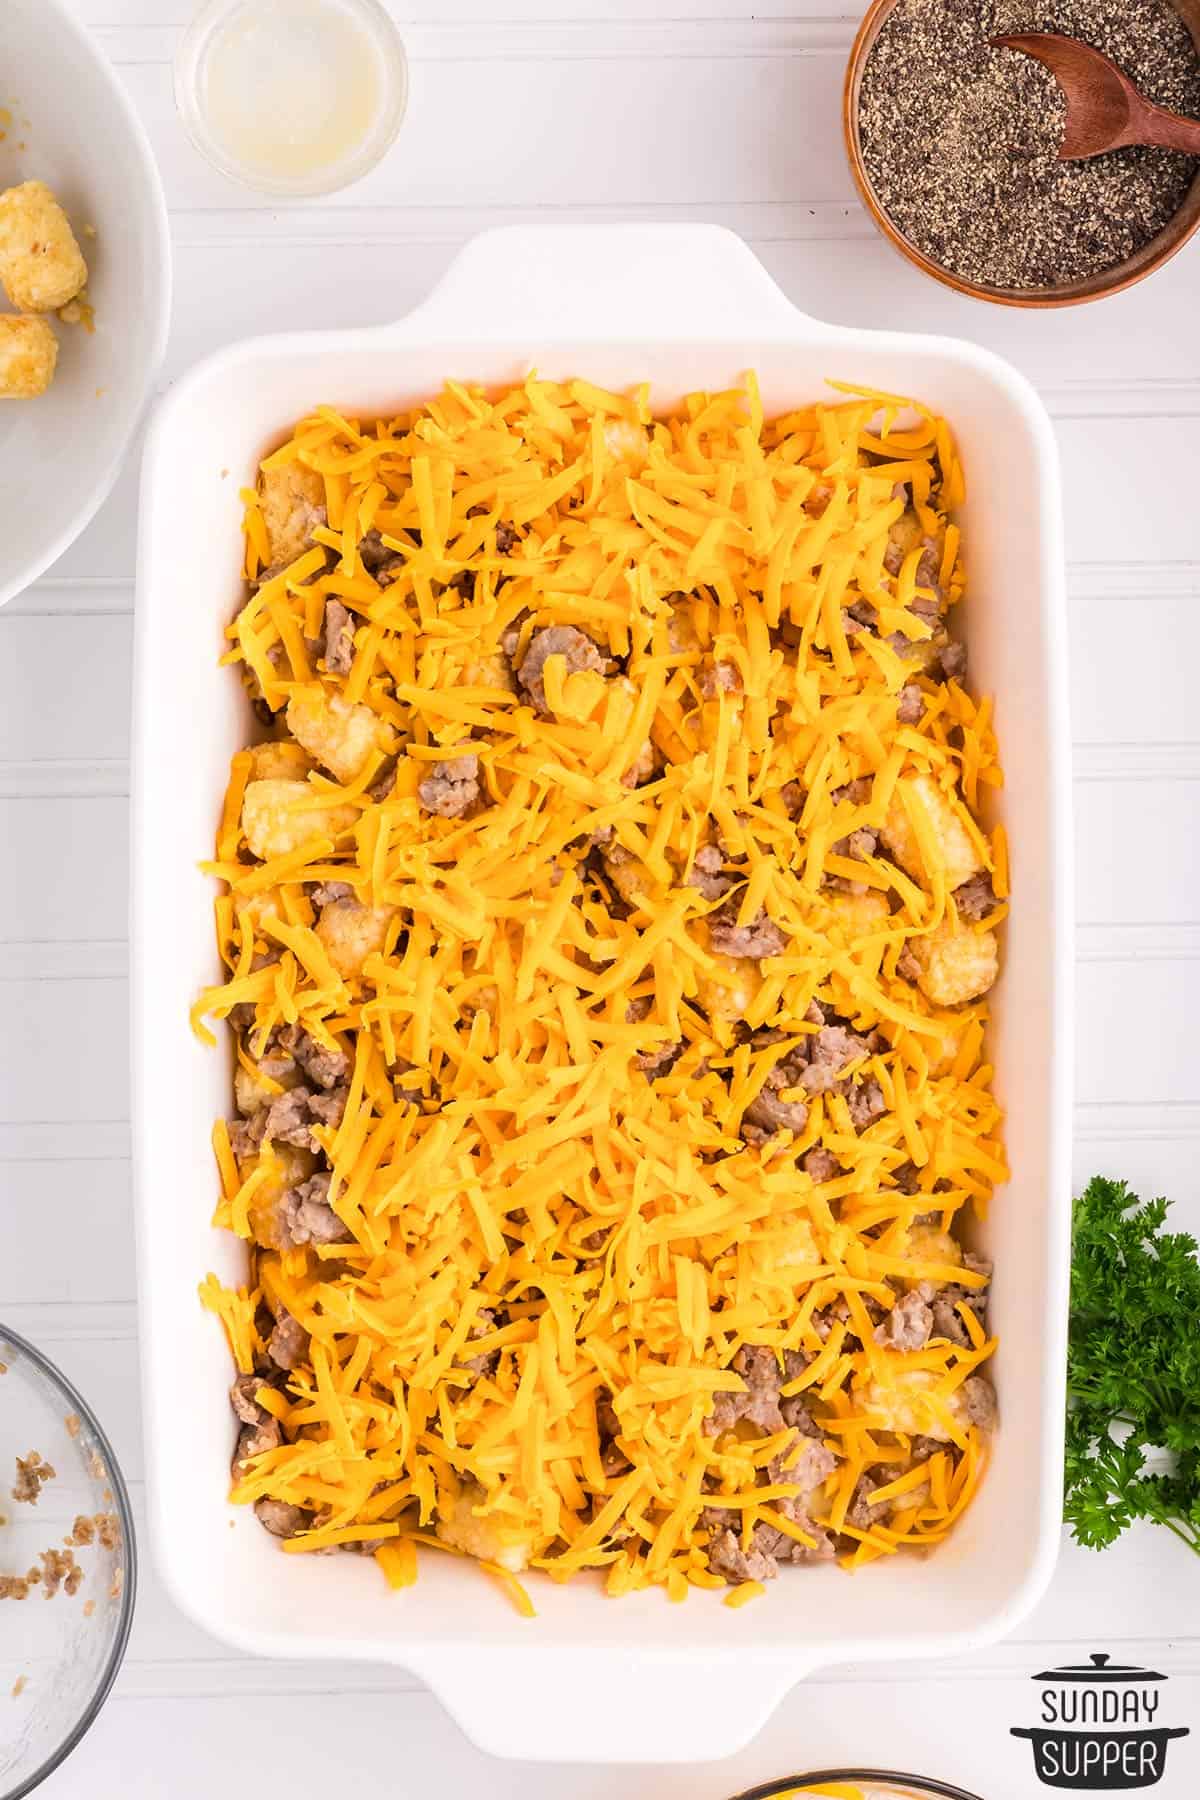 cheese, sausage, and tater tots added to the casserole dish